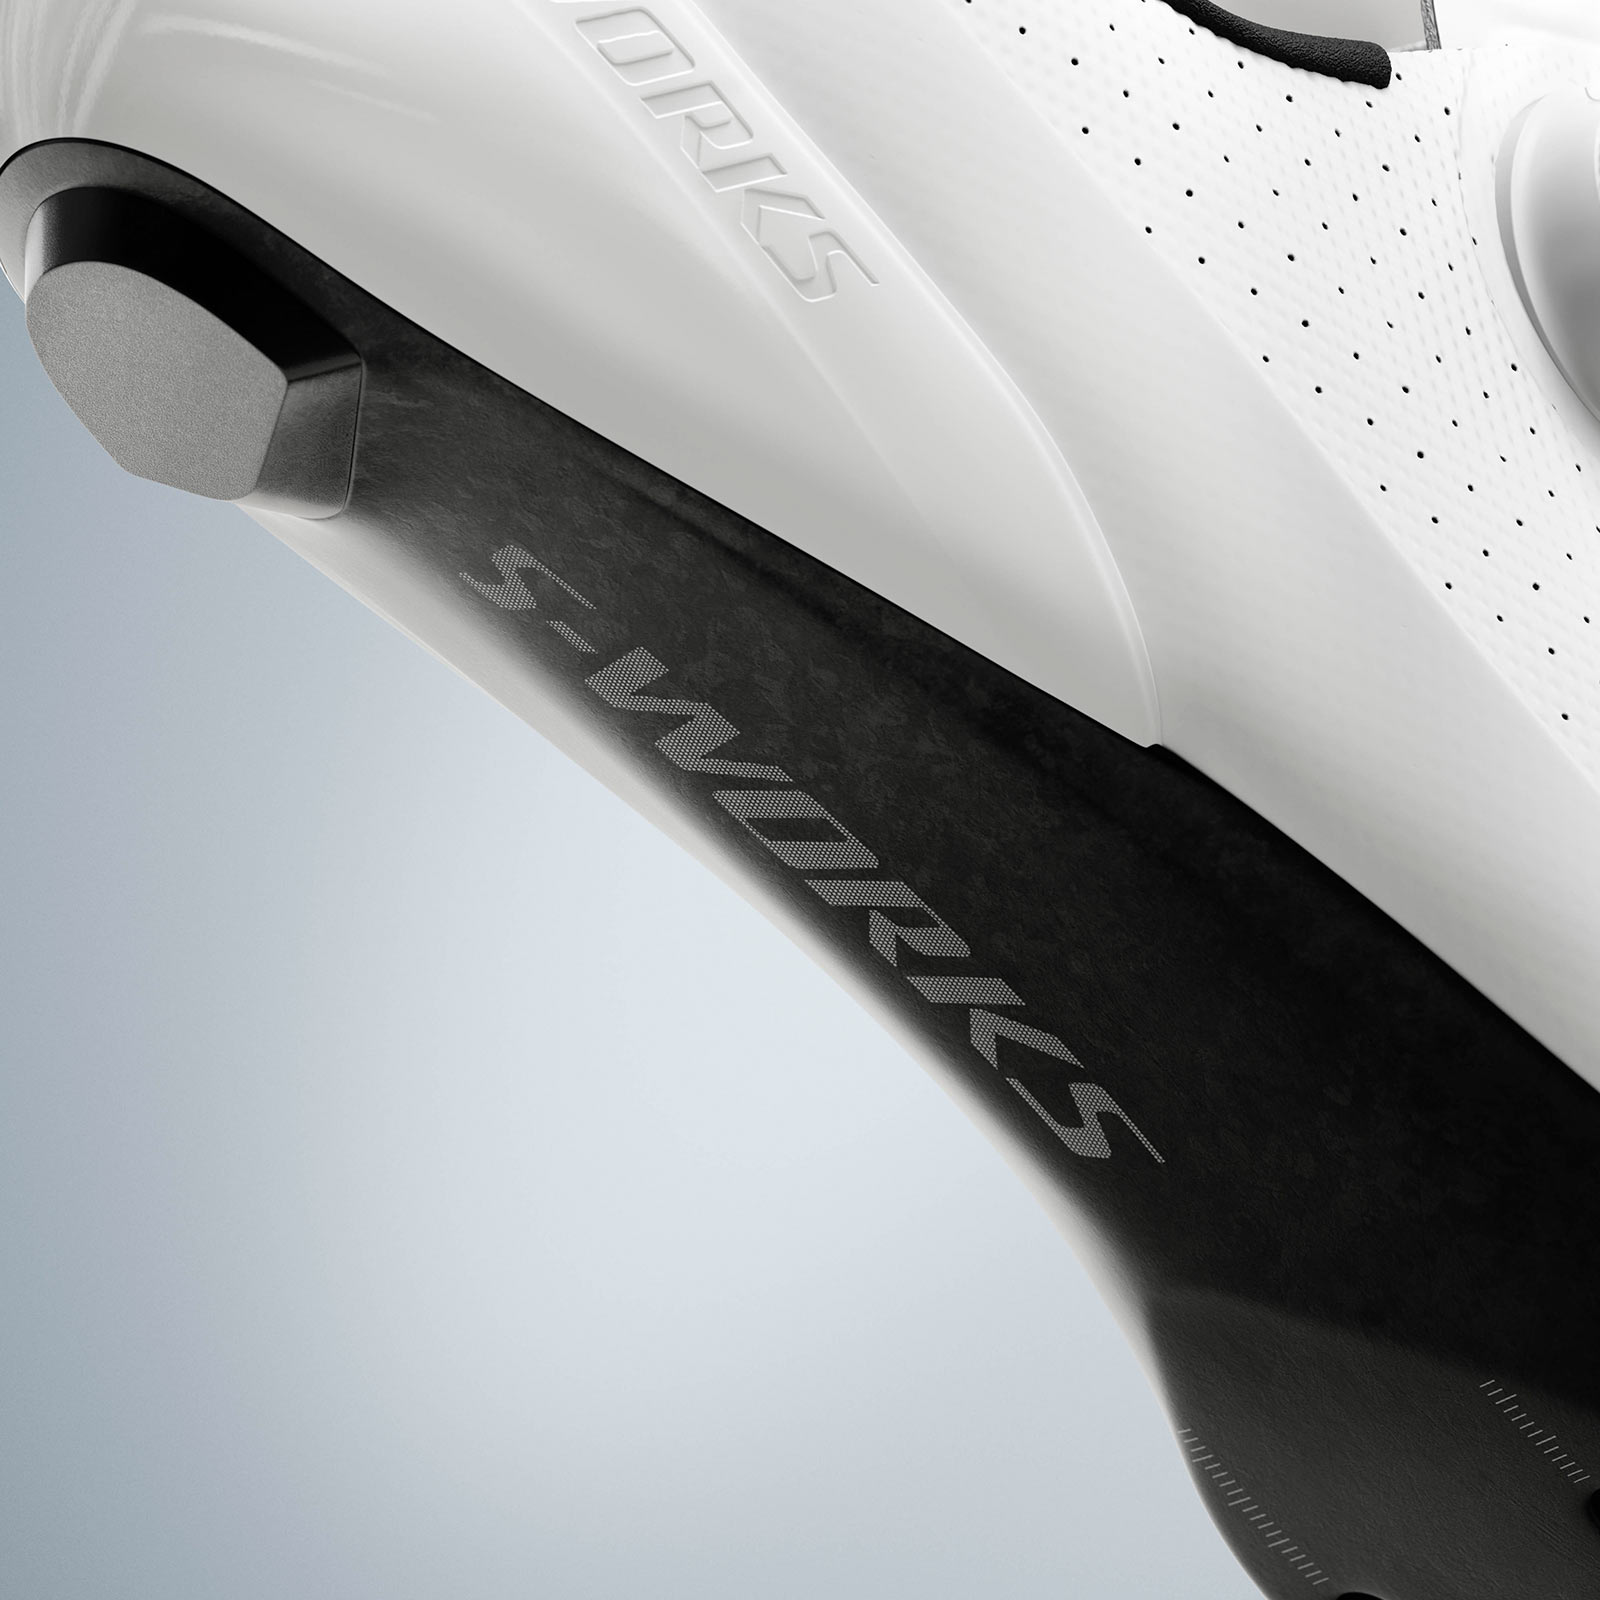 specialized s-works torch road bike shoe closeup details of carbon sole